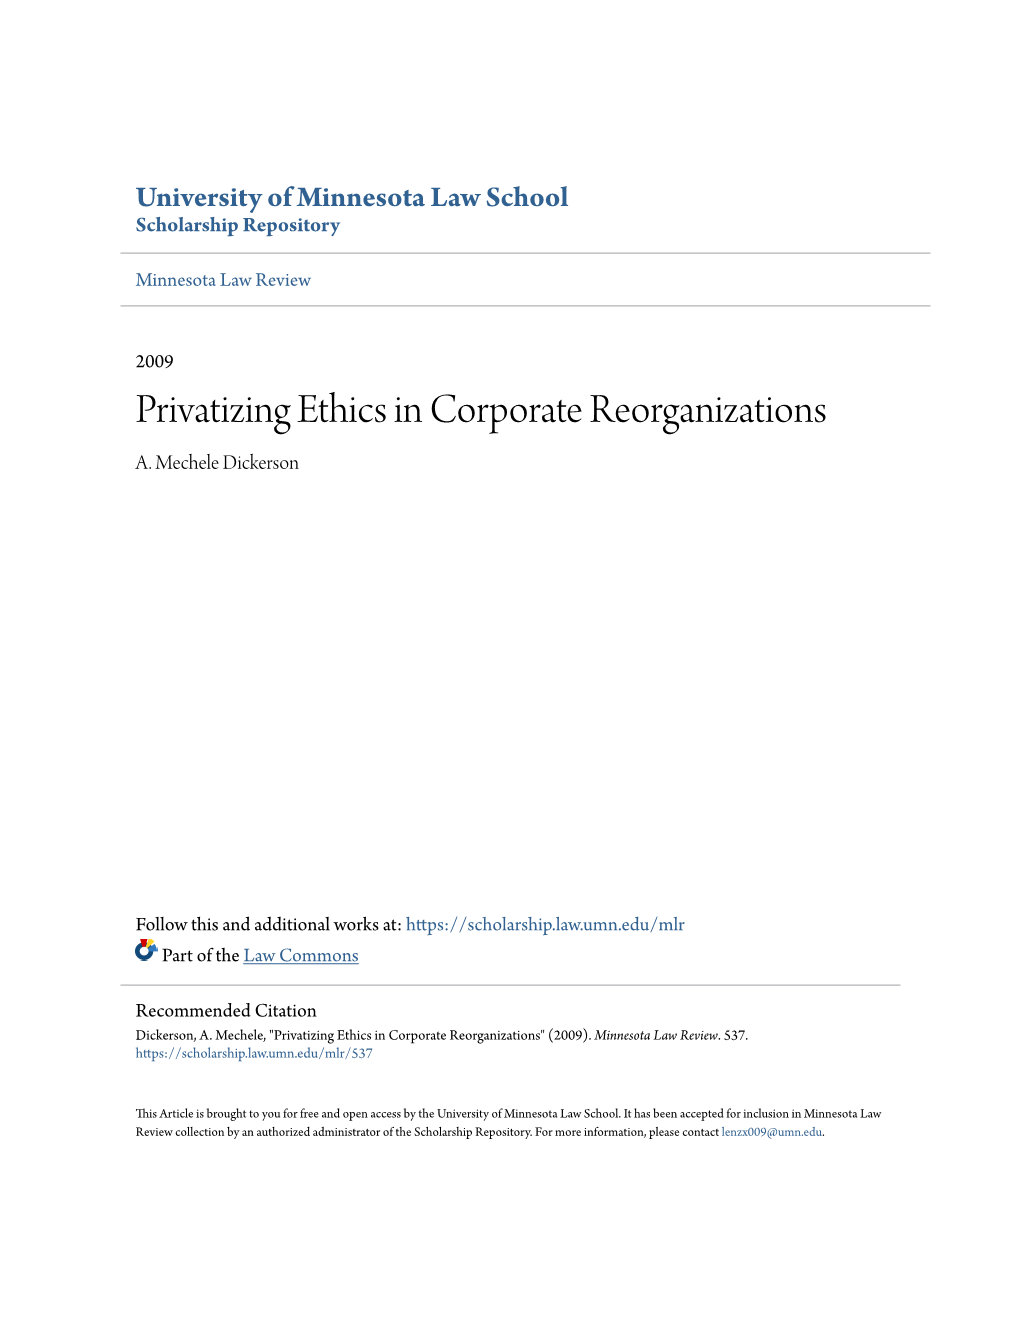 Privatizing Ethics in Corporate Reorganizations A